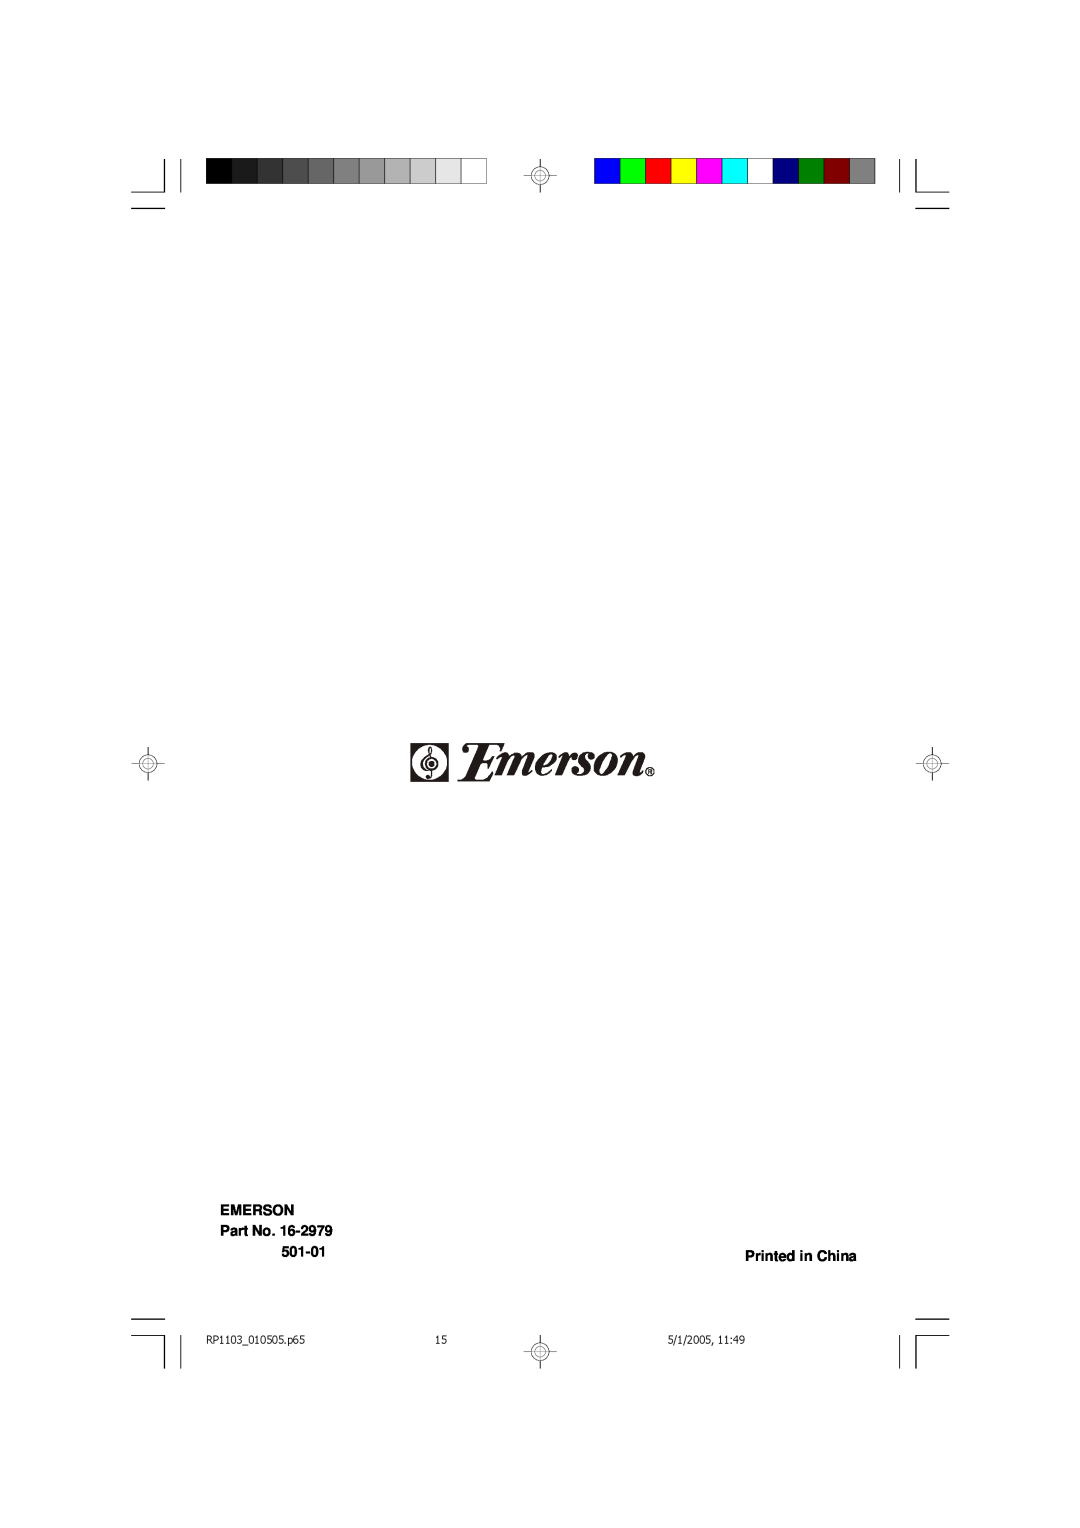 Emerson owner manual Emerson, 501-01, RP1103010505.p65, 5/1/2005 